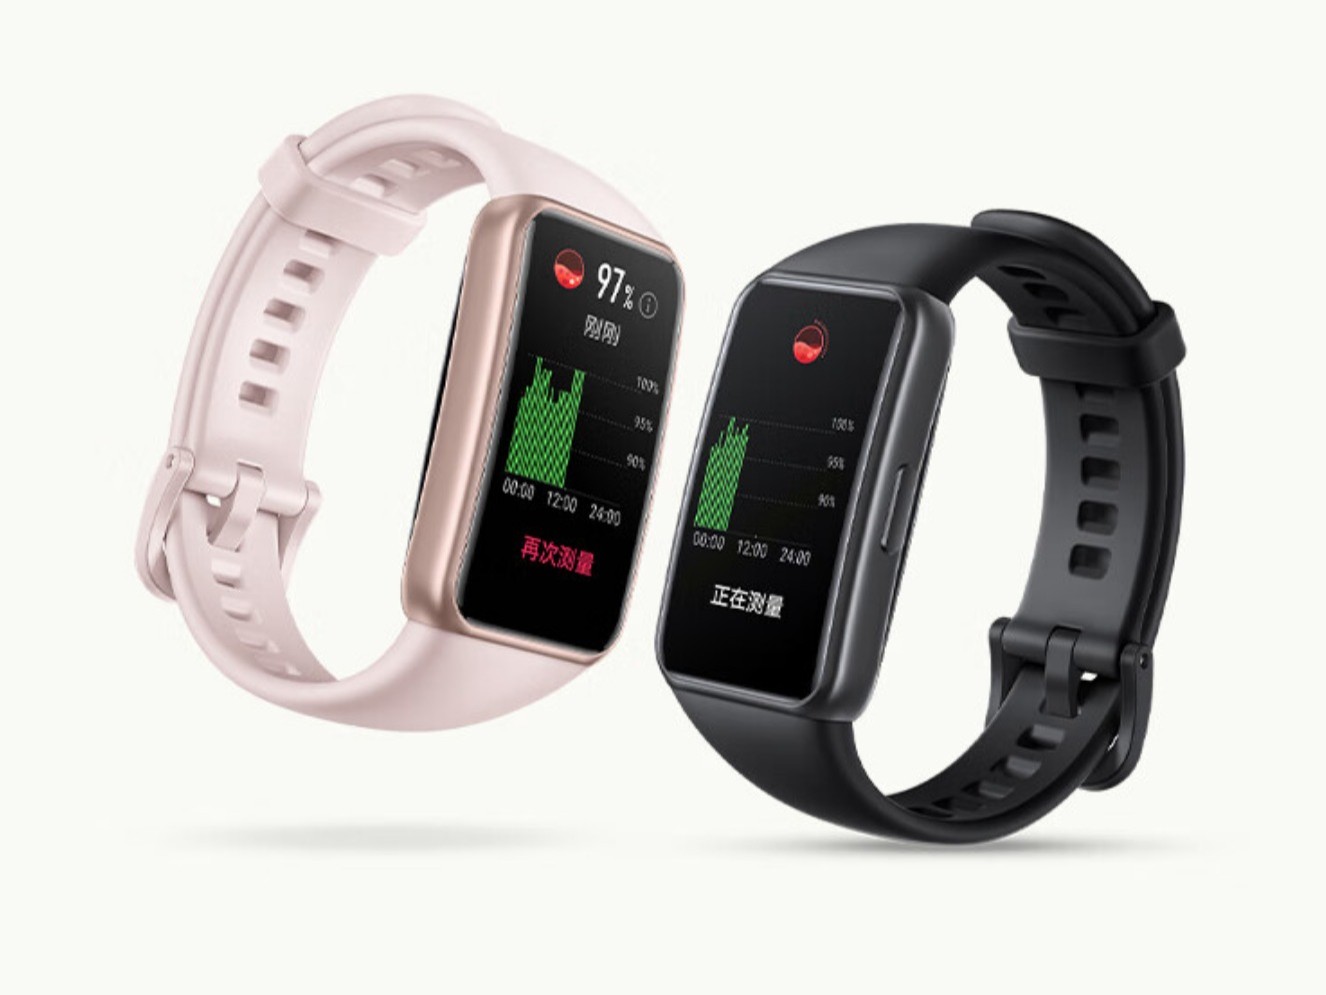 Honor Band 7 With 1.47-Inch AMOLED Display, Blood Oxygen Monitoring  Launched: Price, Specifications